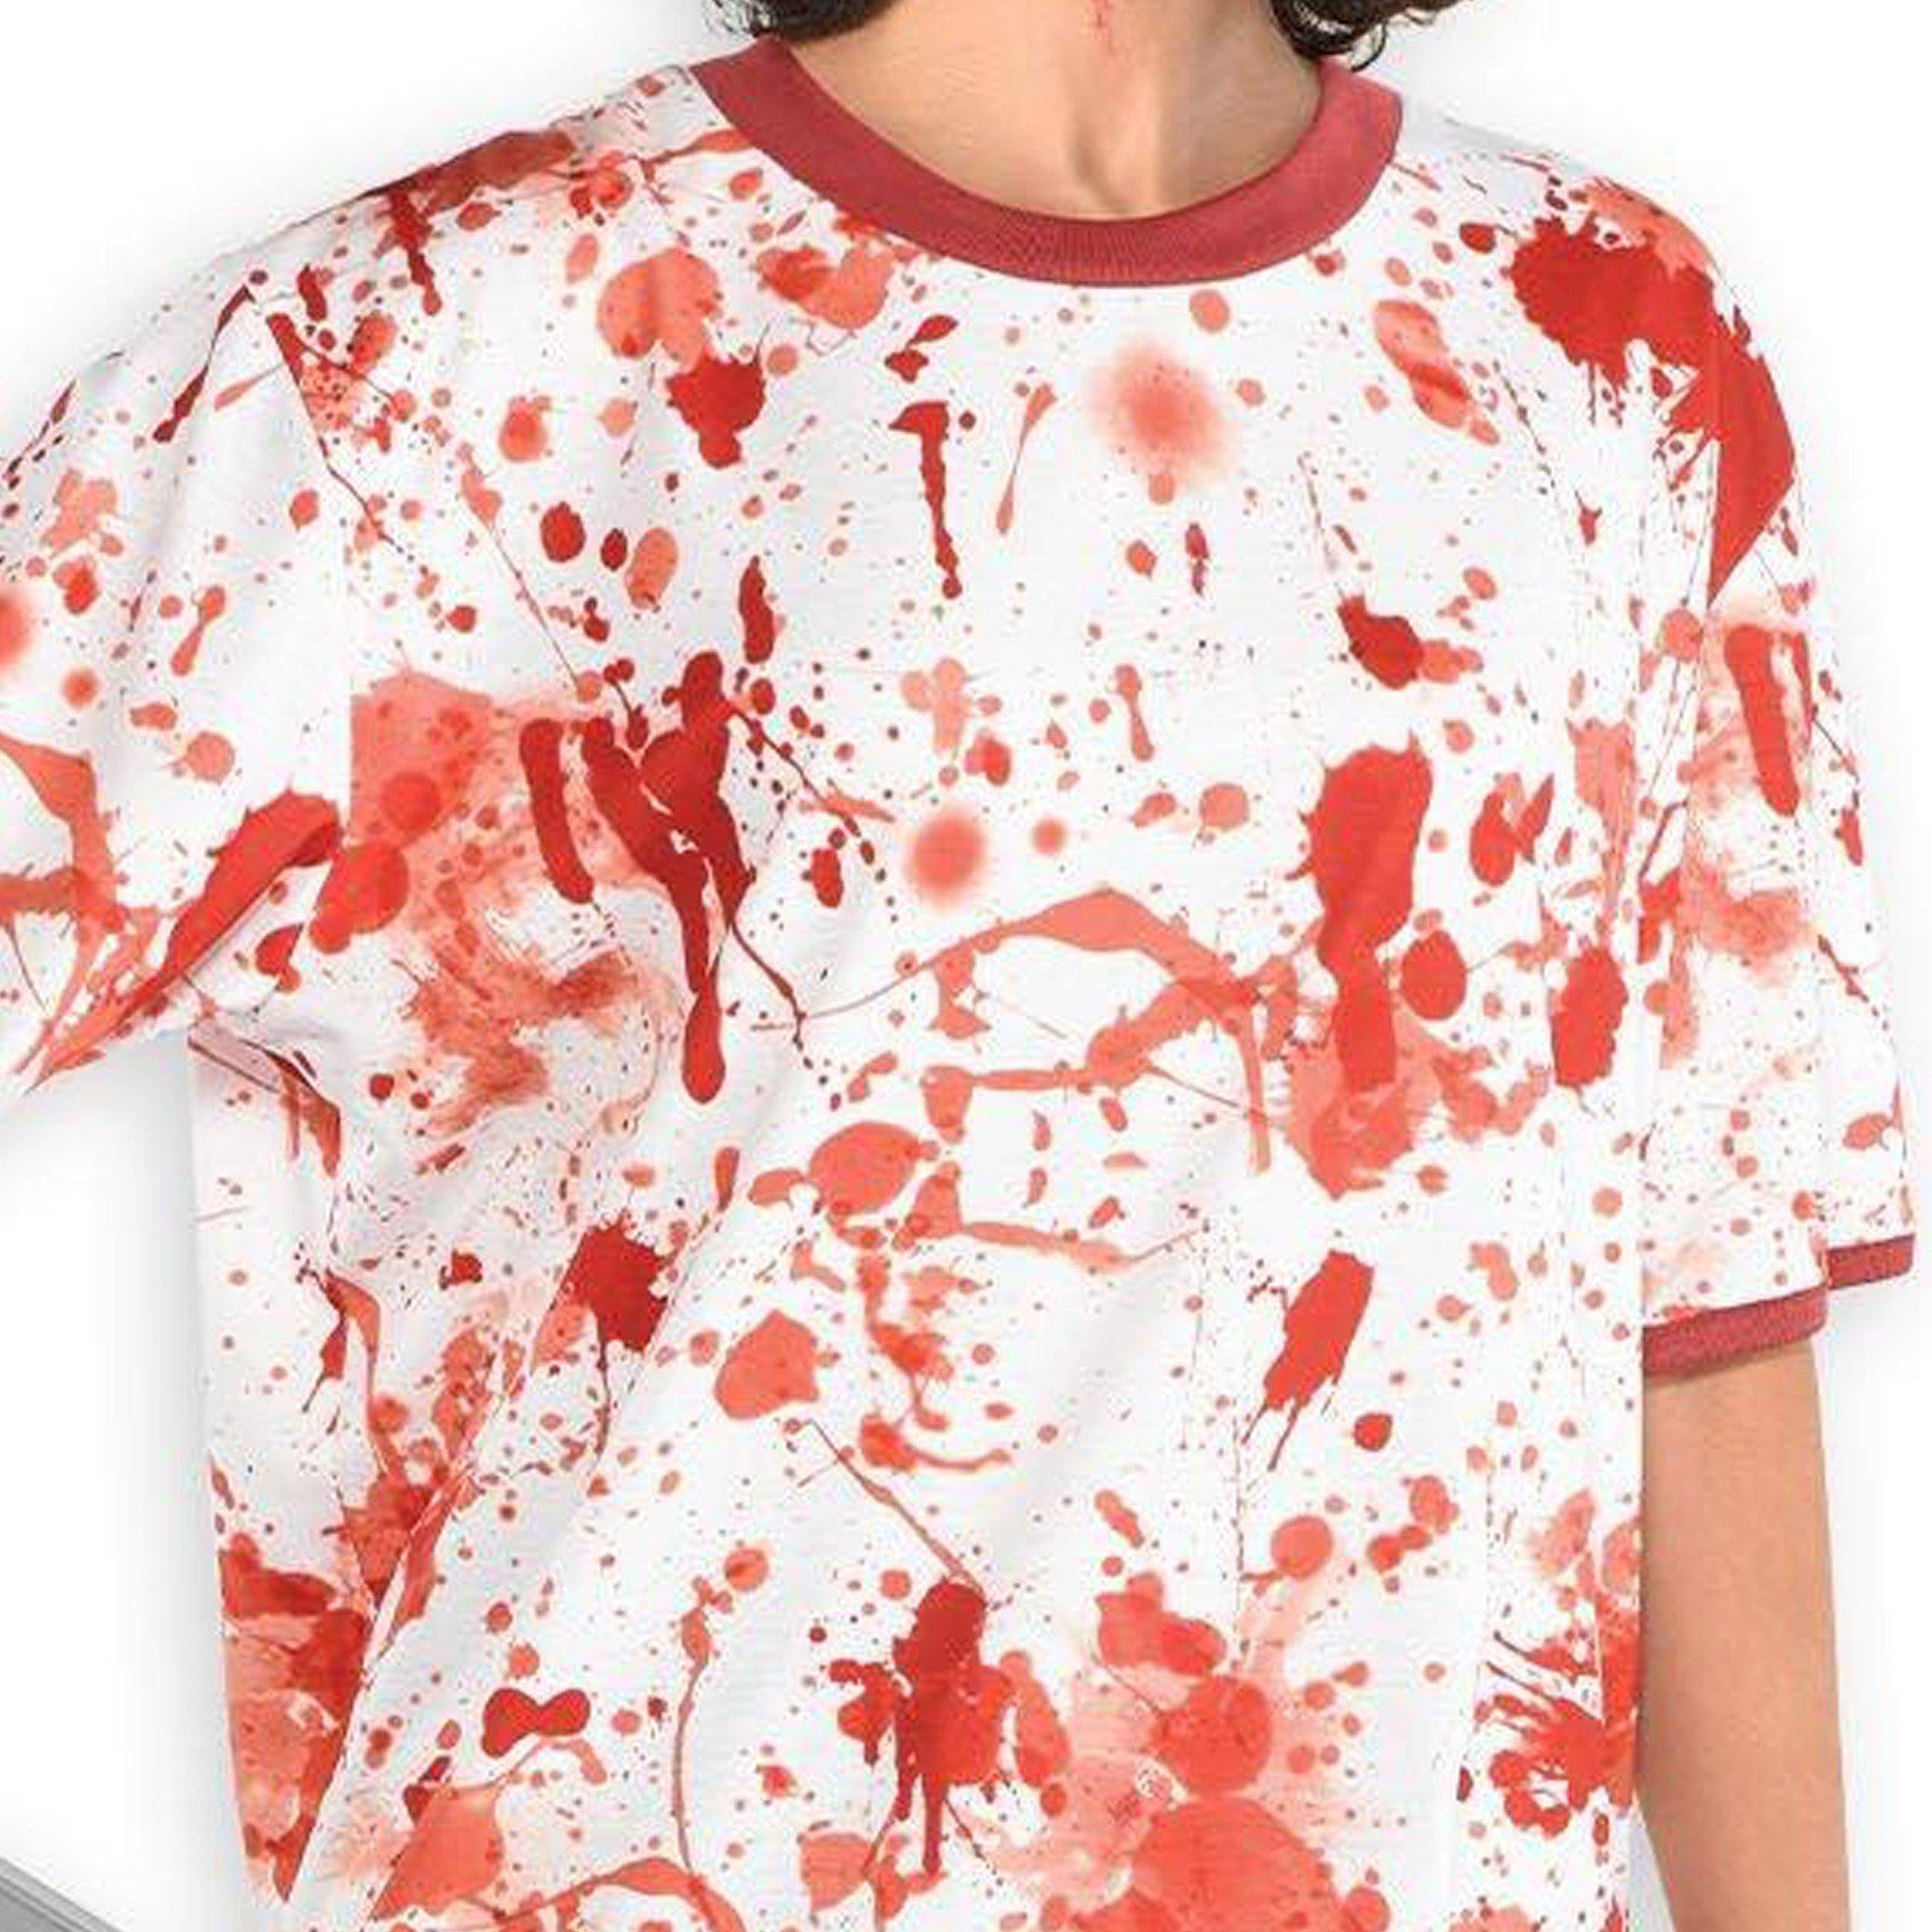 Bloody Ringer T-Shirt for Adults